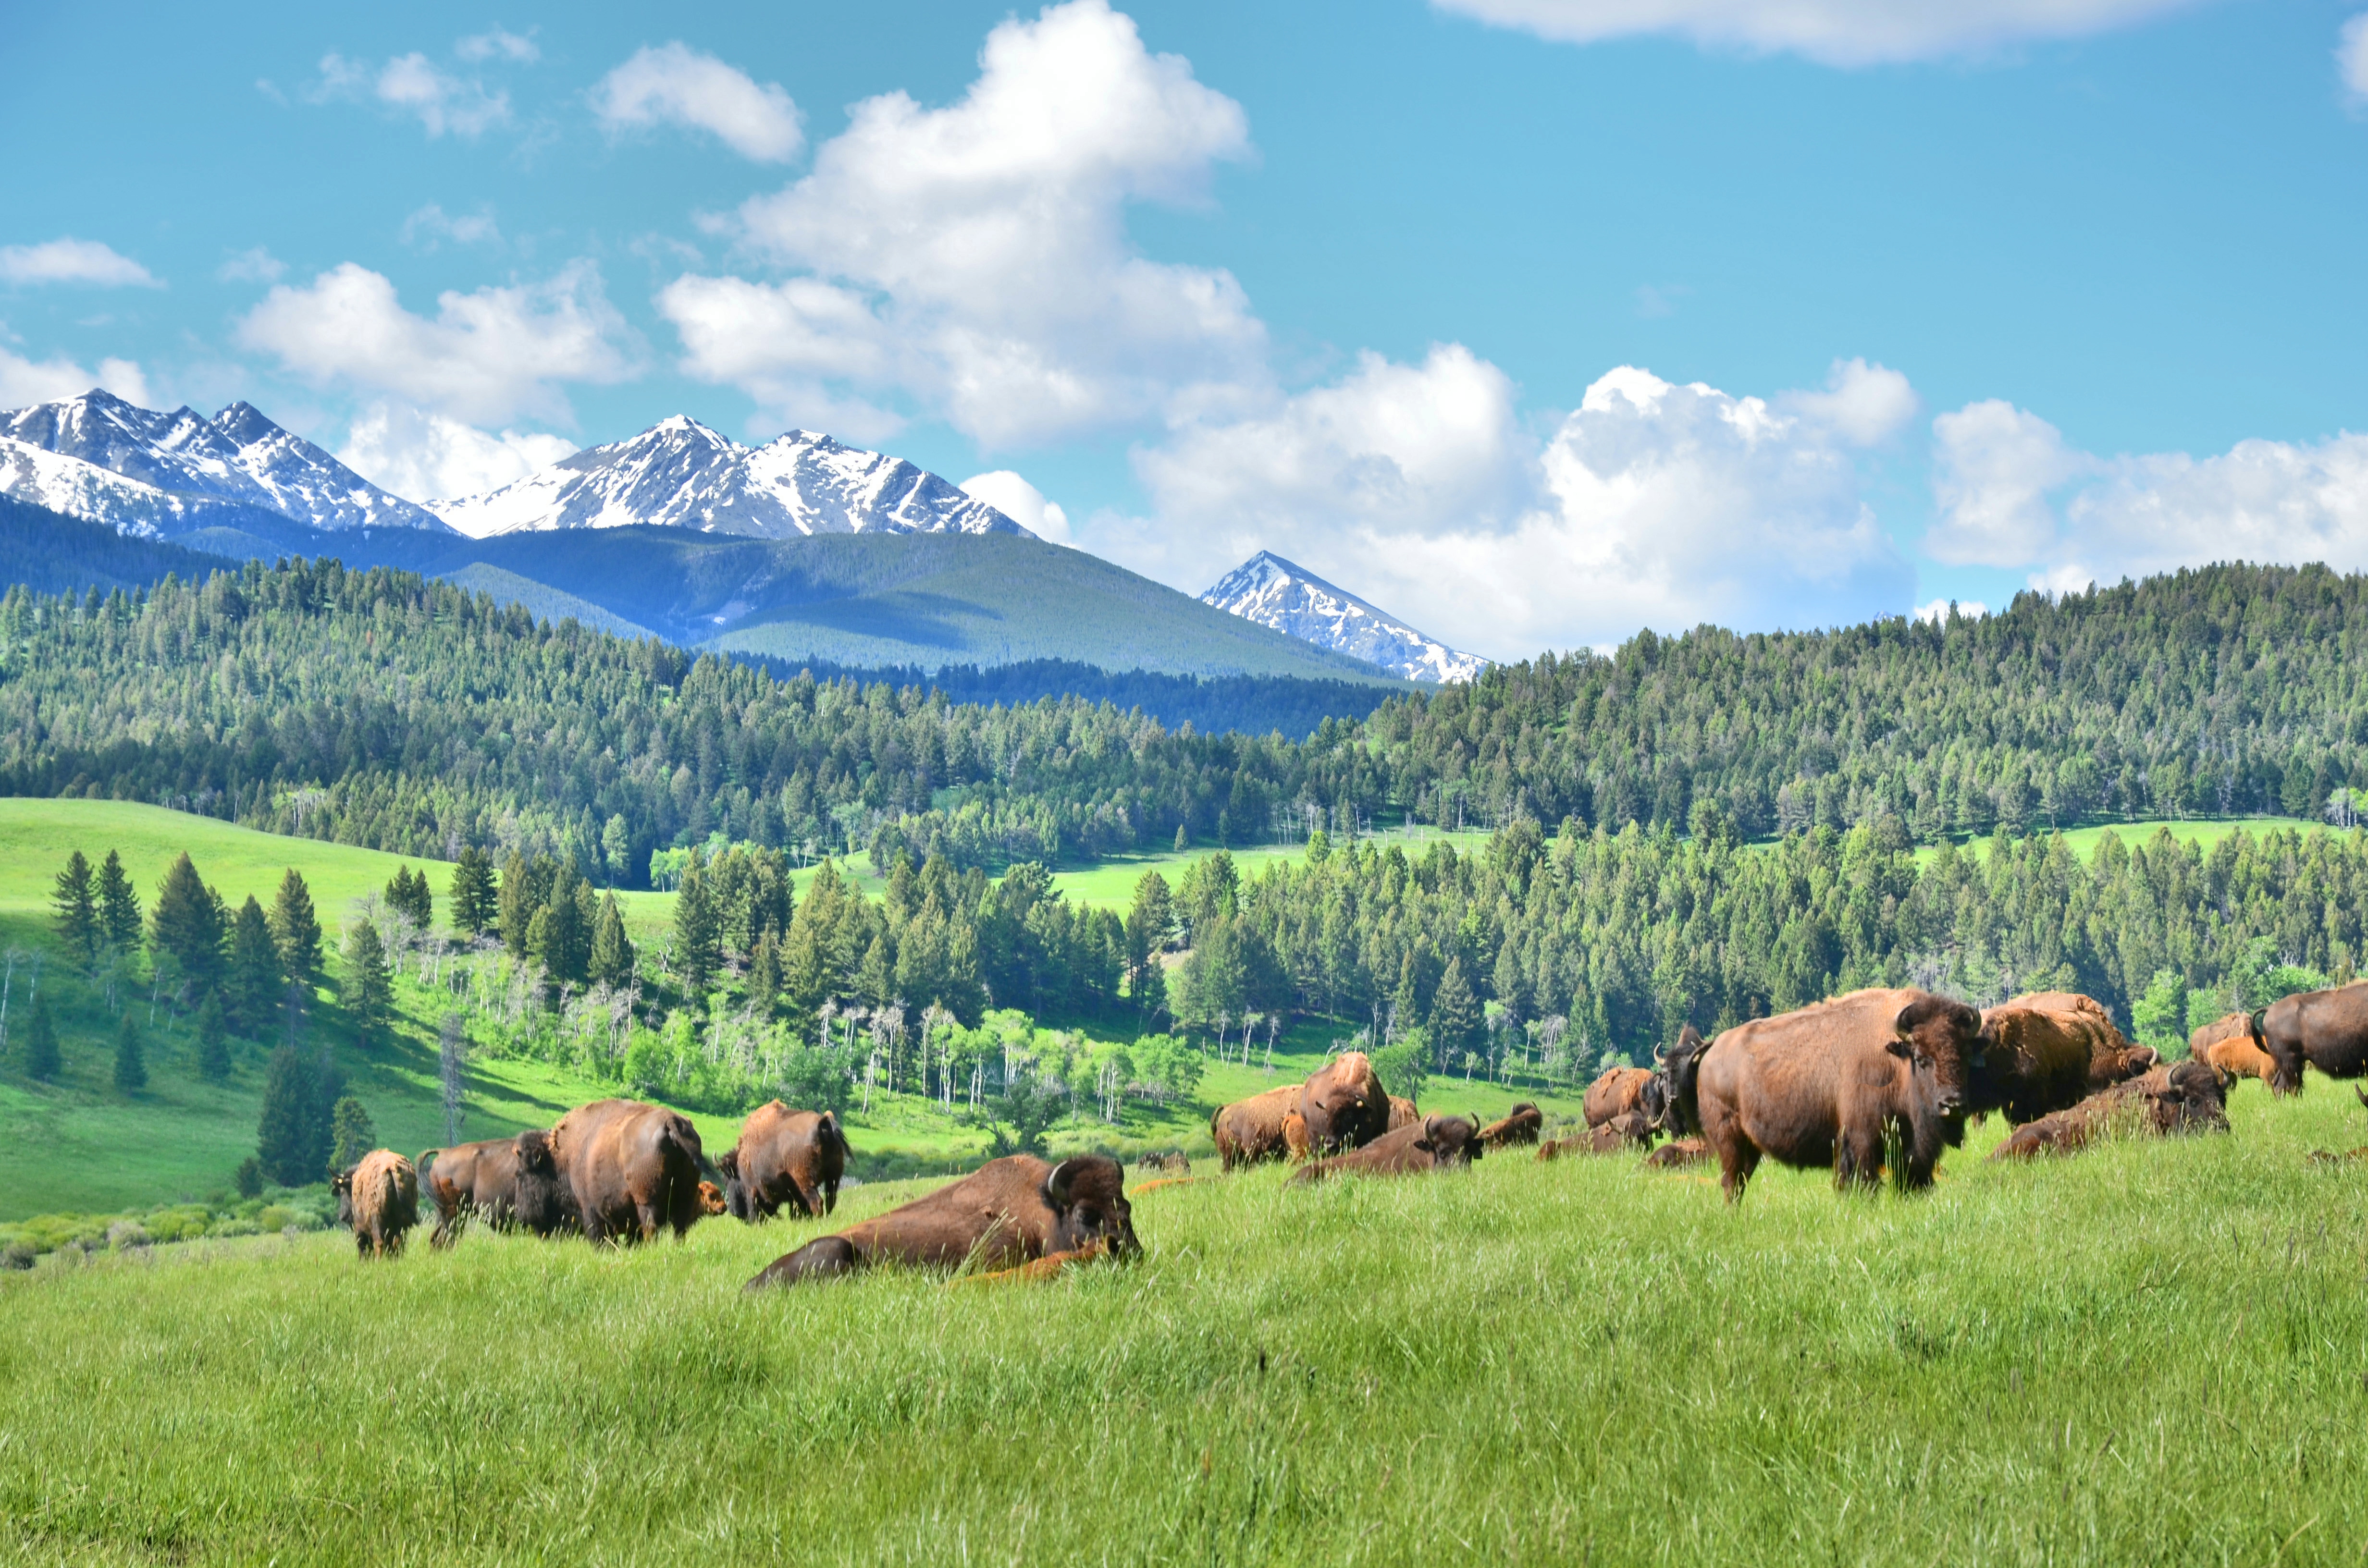 Bison enthusiasts gather at Ted Turner’s ranch